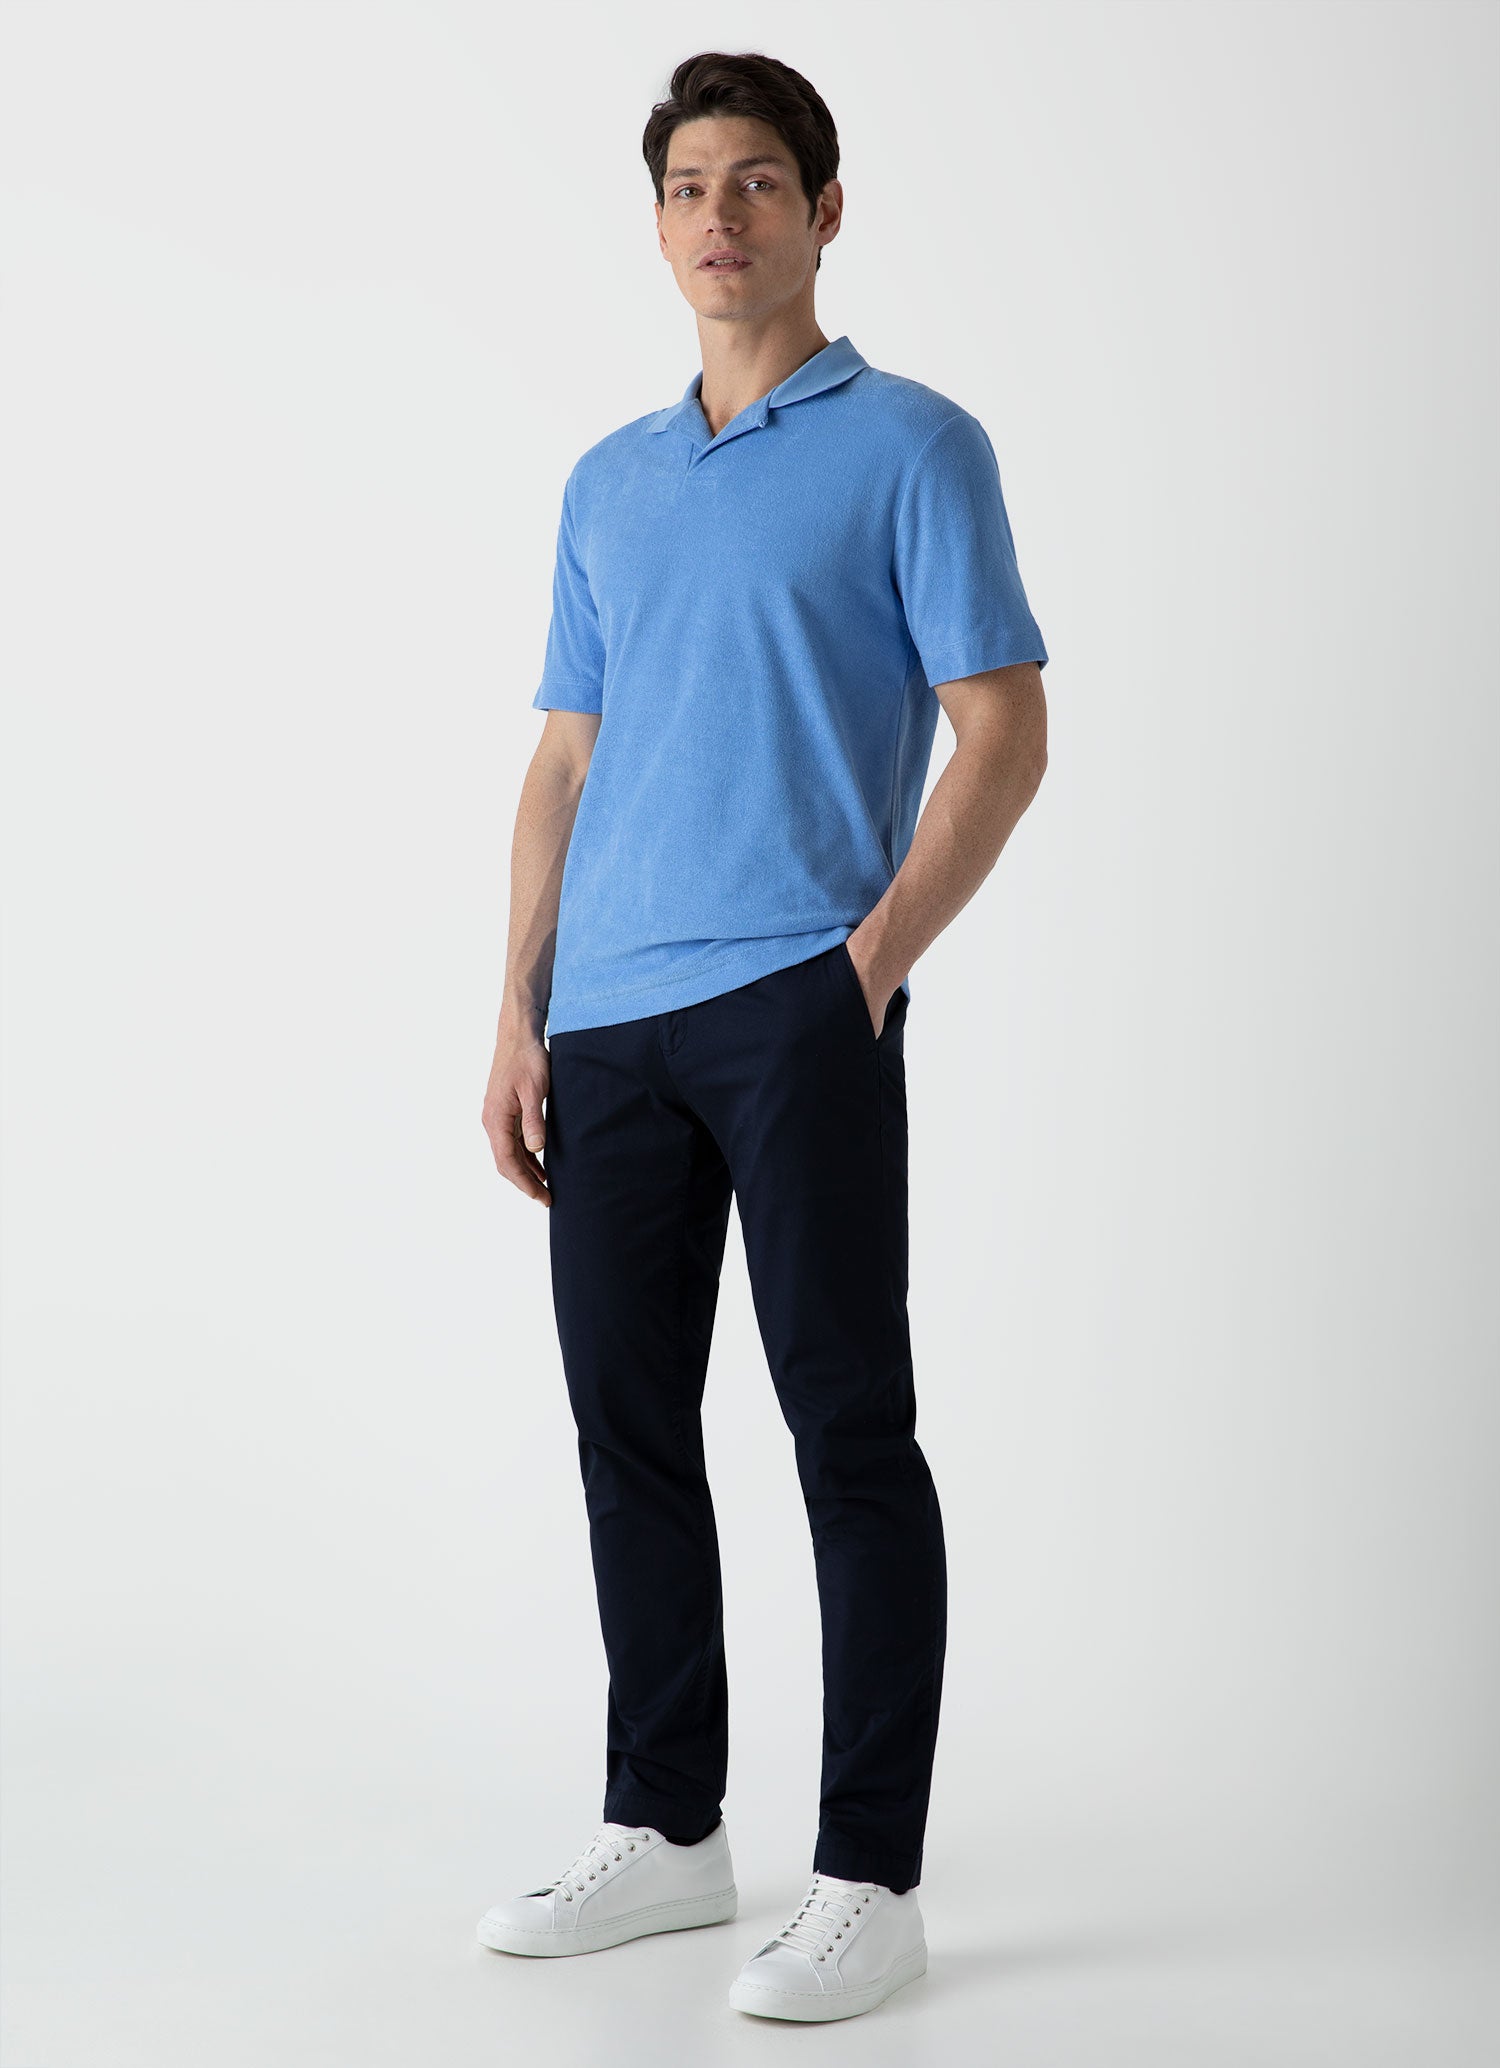 Men's Towelling Polo Shirt in Cool Blue